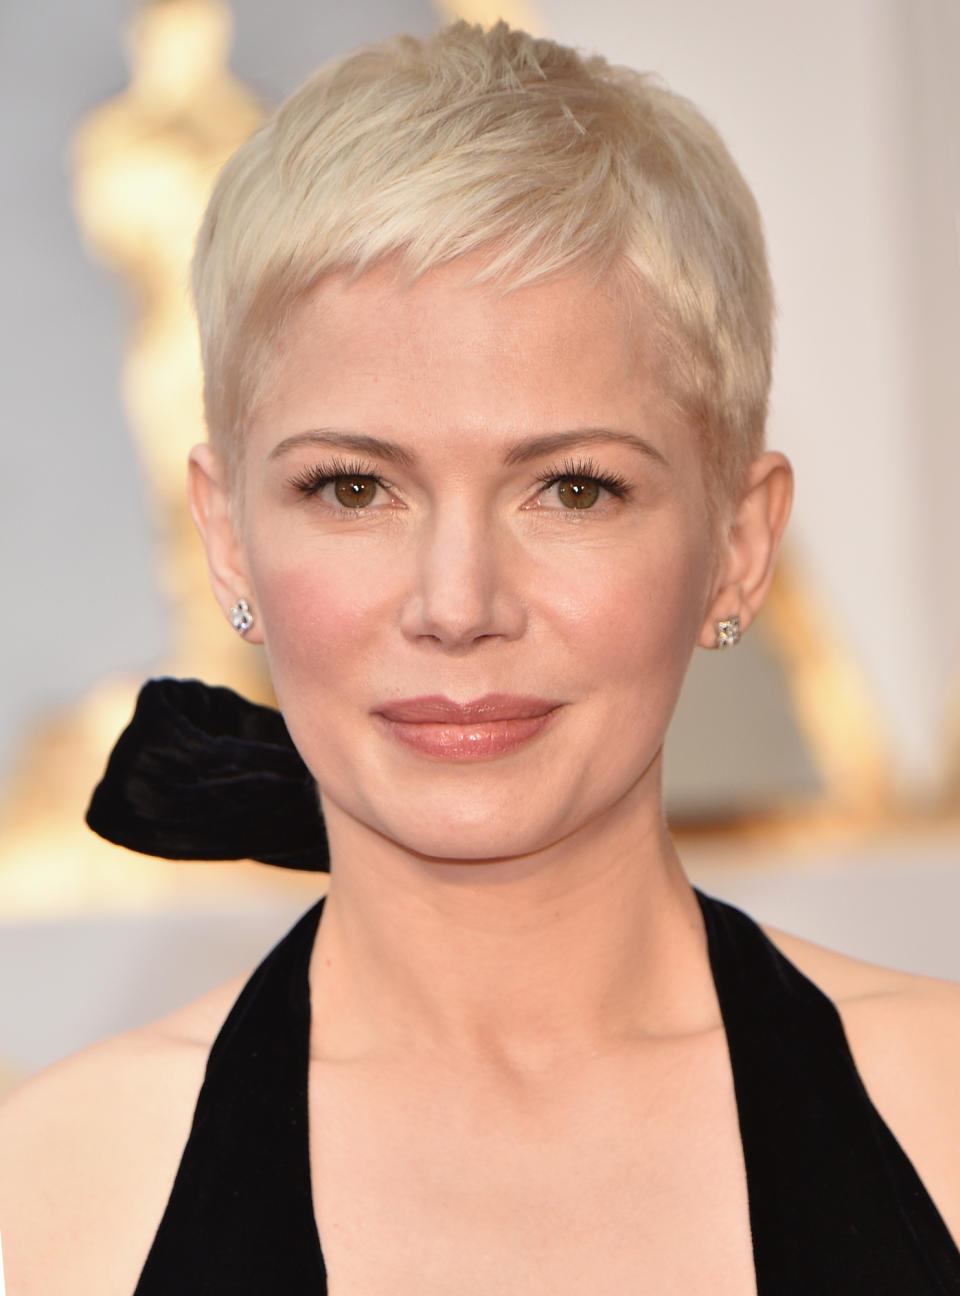 20 of the Most Iconic Celebrity Pixie Cuts